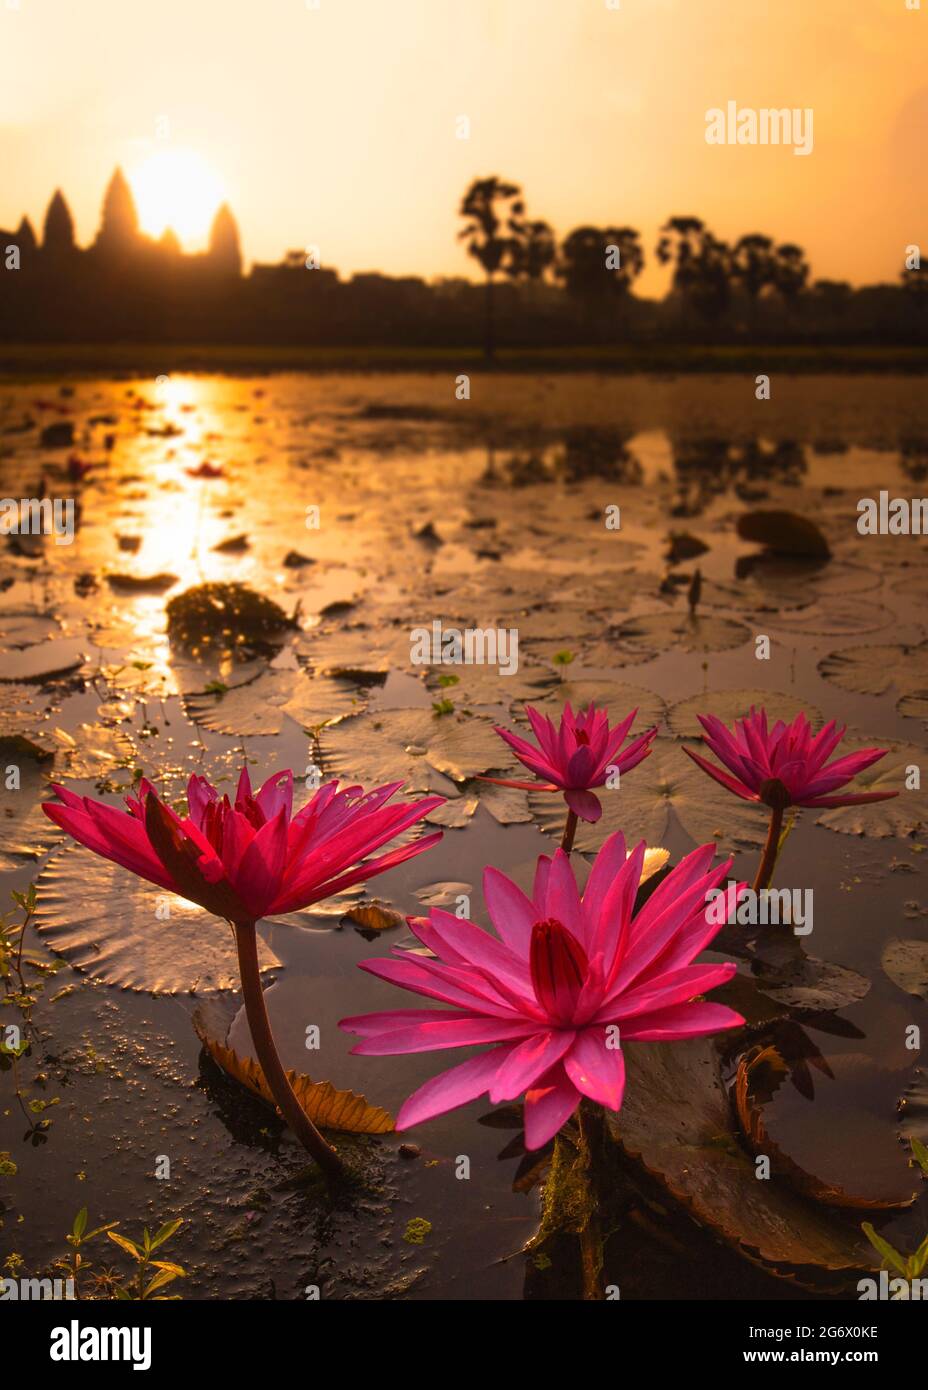 Angkor Wat golden sunrise portrait with beautiful pink water lily lotus plant in foreground.  Dynamic shot of this Iconic Cambodian temple. Stock Photo